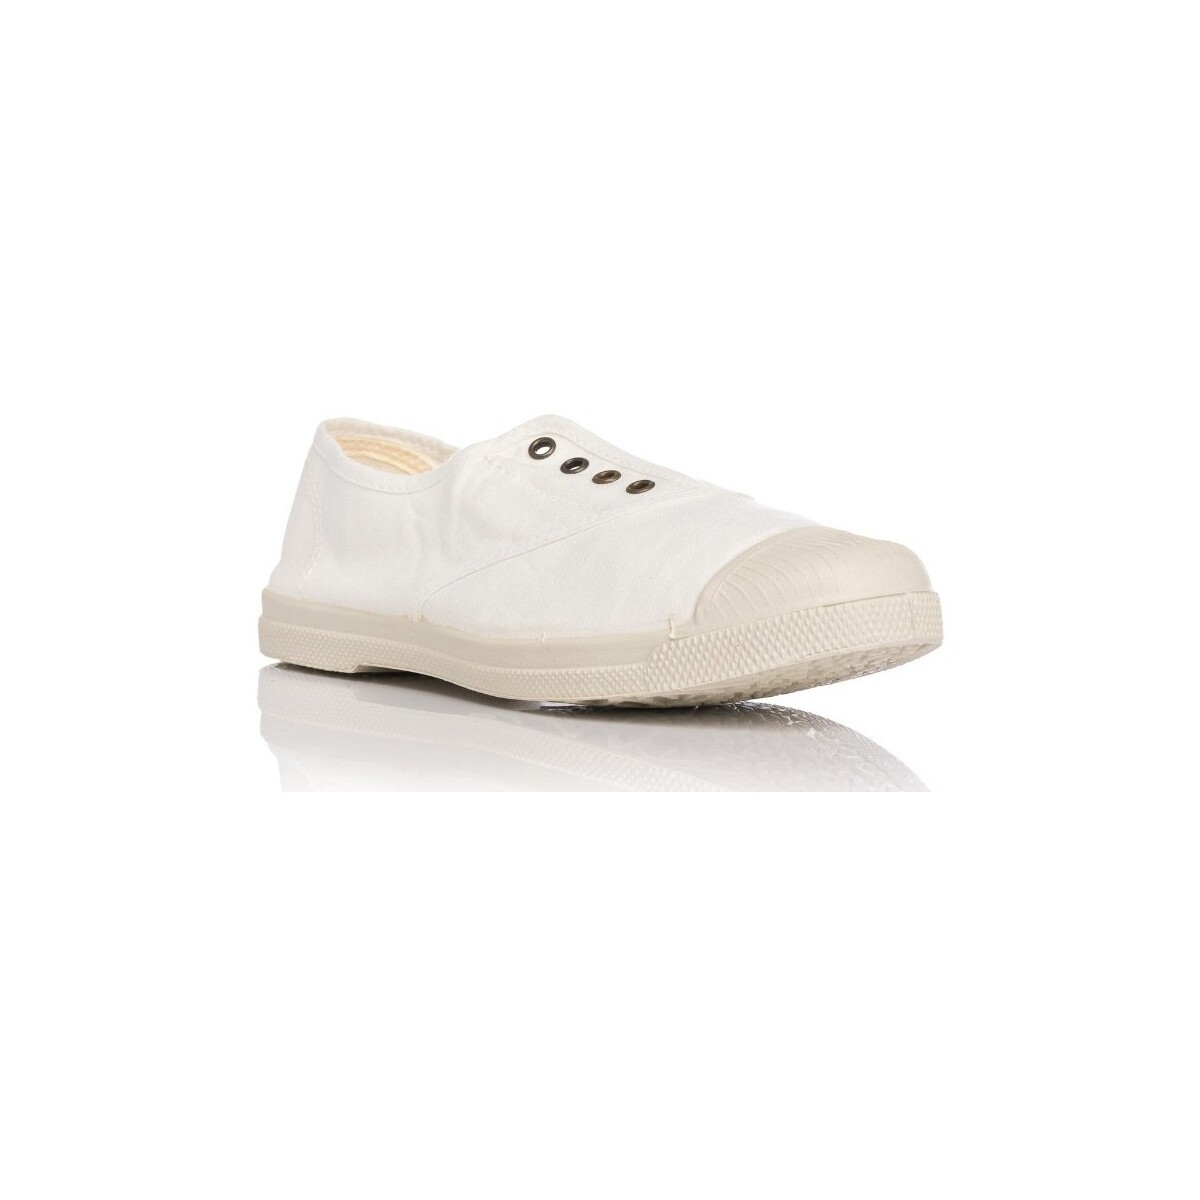 Chaussures Homme Baskets basses Natural World 102 Blanc